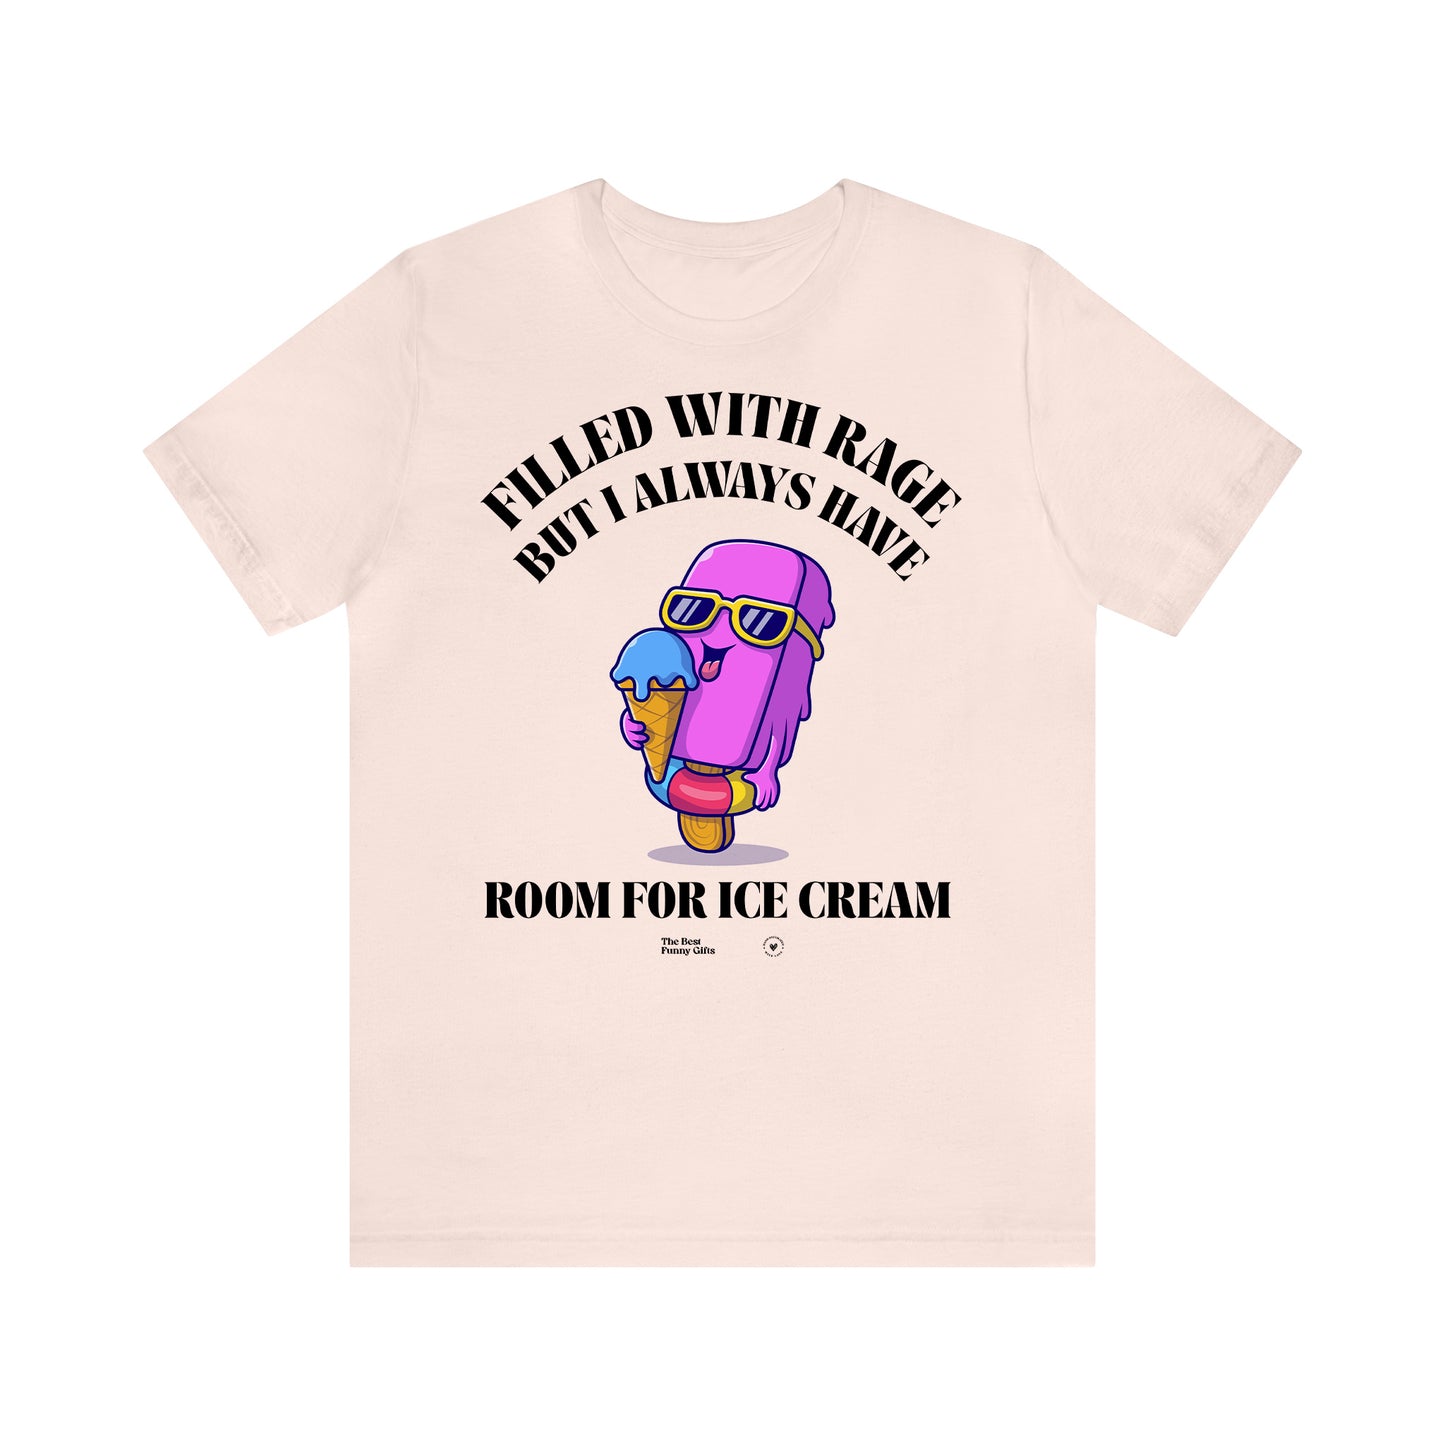 Funny Shirts for Women - Filled With Rage but I Always Have Room for Ice Cream - Women’s T Shirts